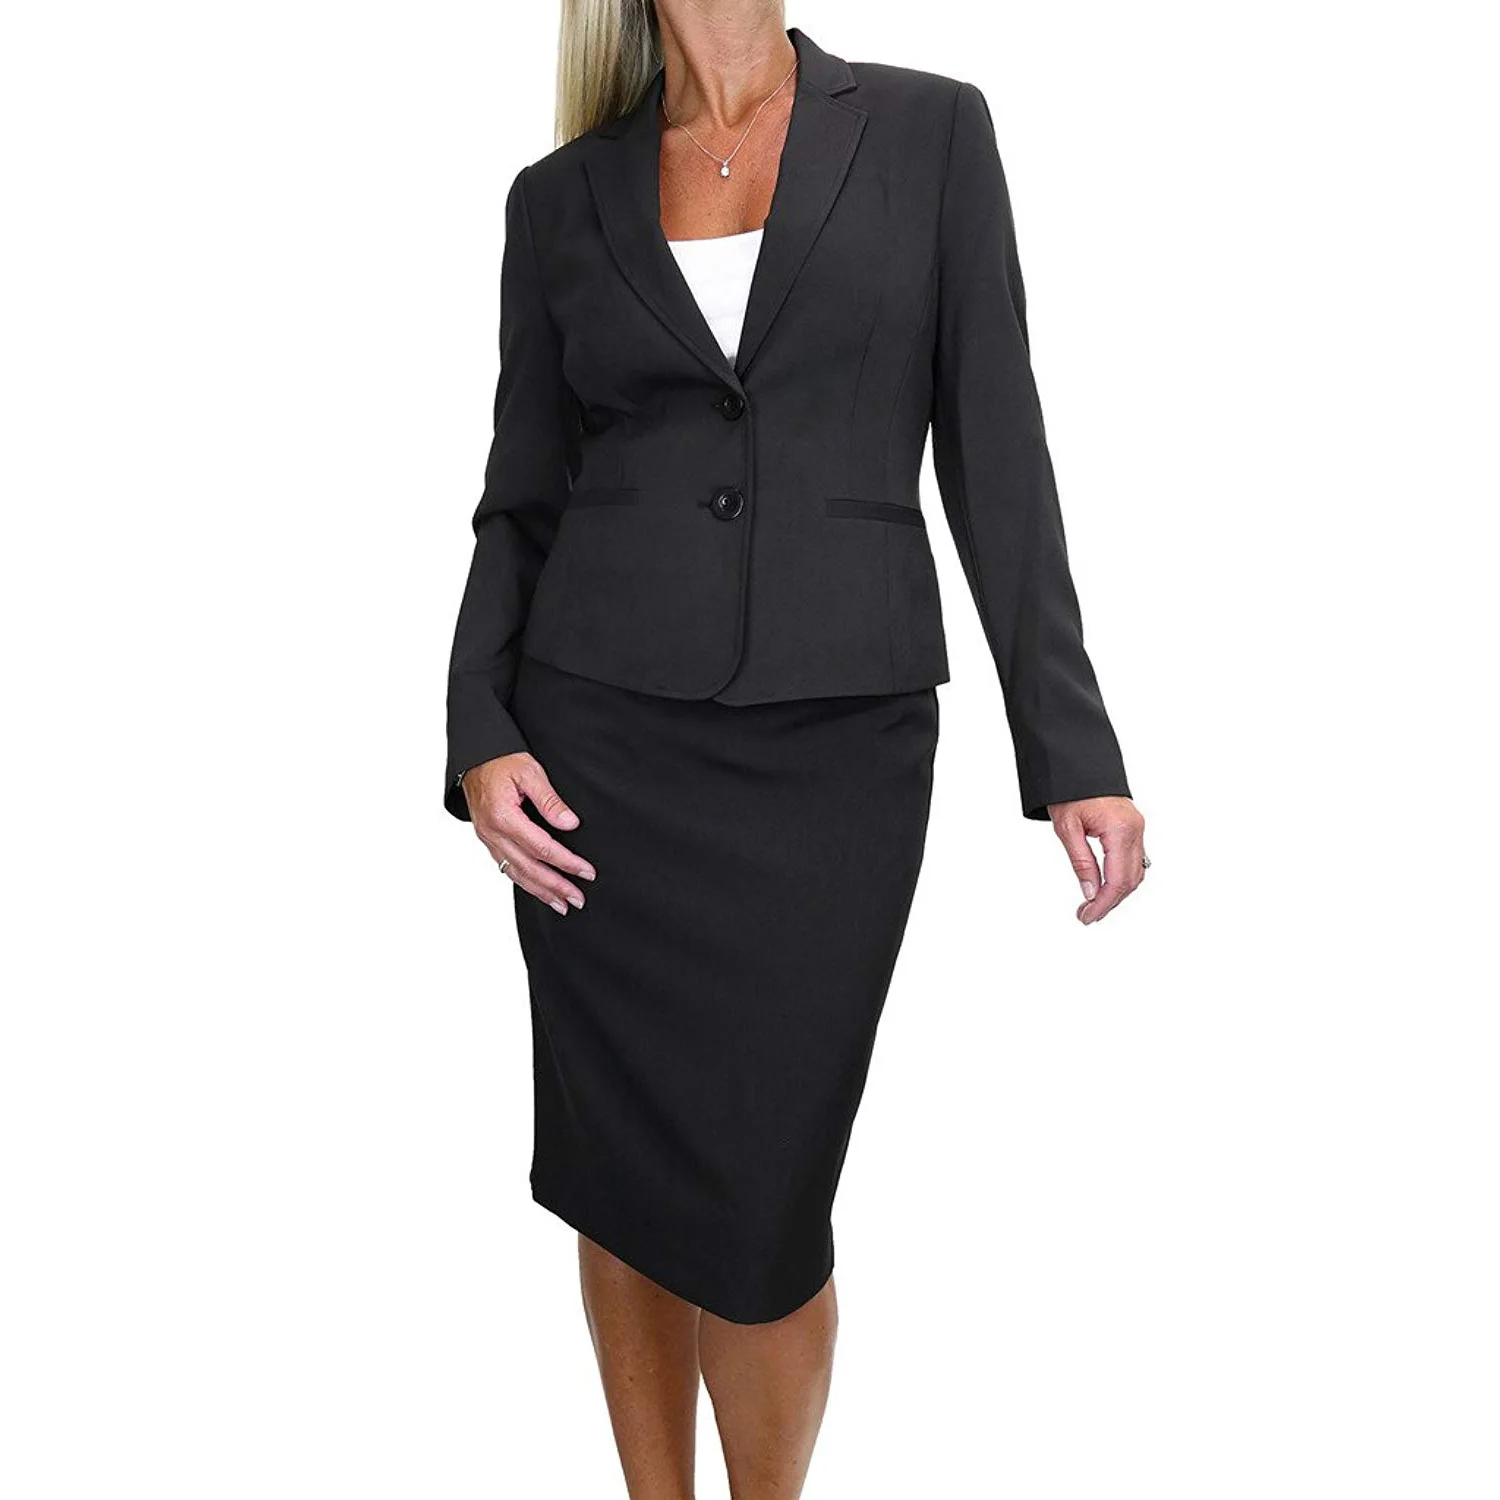 Womens Fully Lined Skirt Suit Smart Business Office NEW 